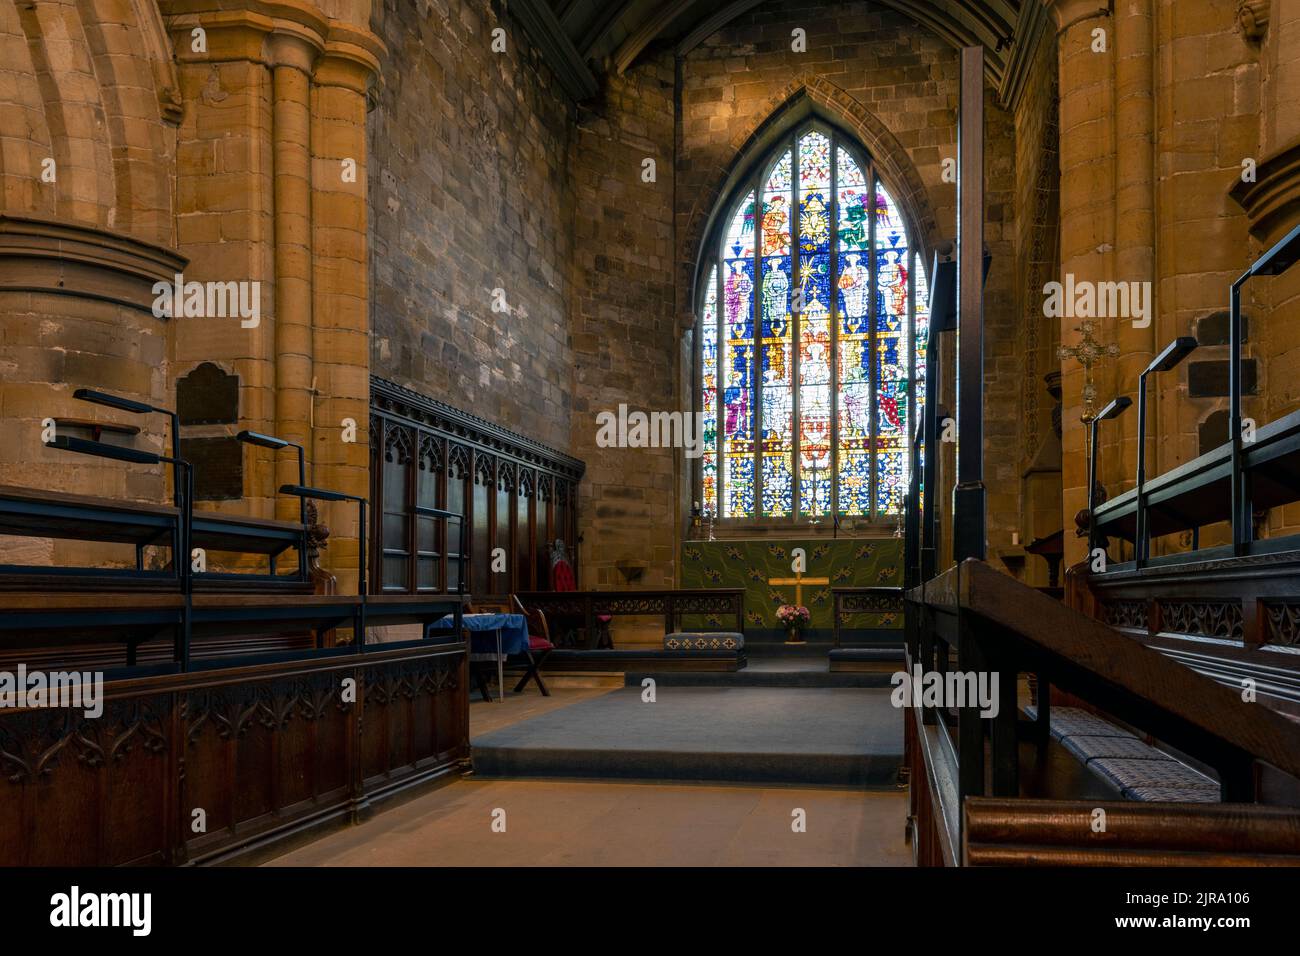 St Mary's Church, Scarborough, North Yorkshire, England, UK  - grade I listed building - interior view of Stock Photo